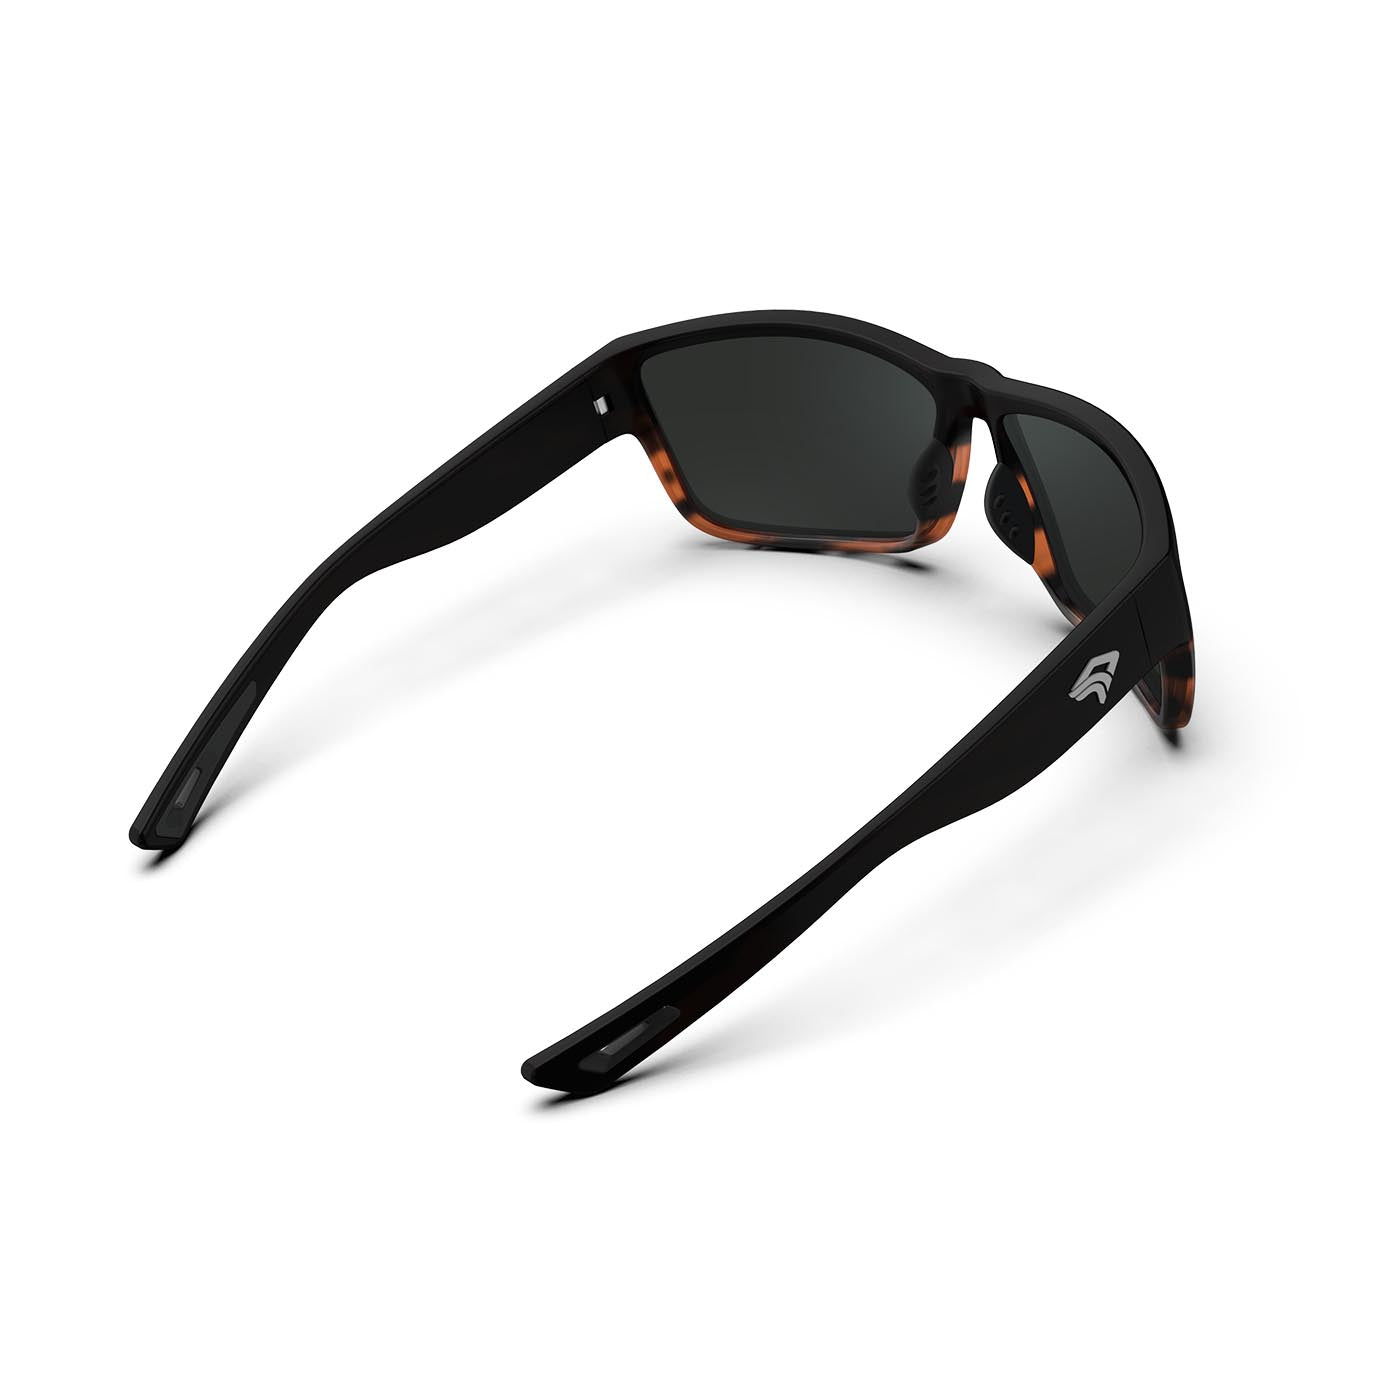 TOREGE 'Dreaminess' Polarized Sports Sunglasses with Lifetime Warranty - Adjustable and Flexible Frame - Ideal for Cycling, Running, Golf, and Fishing